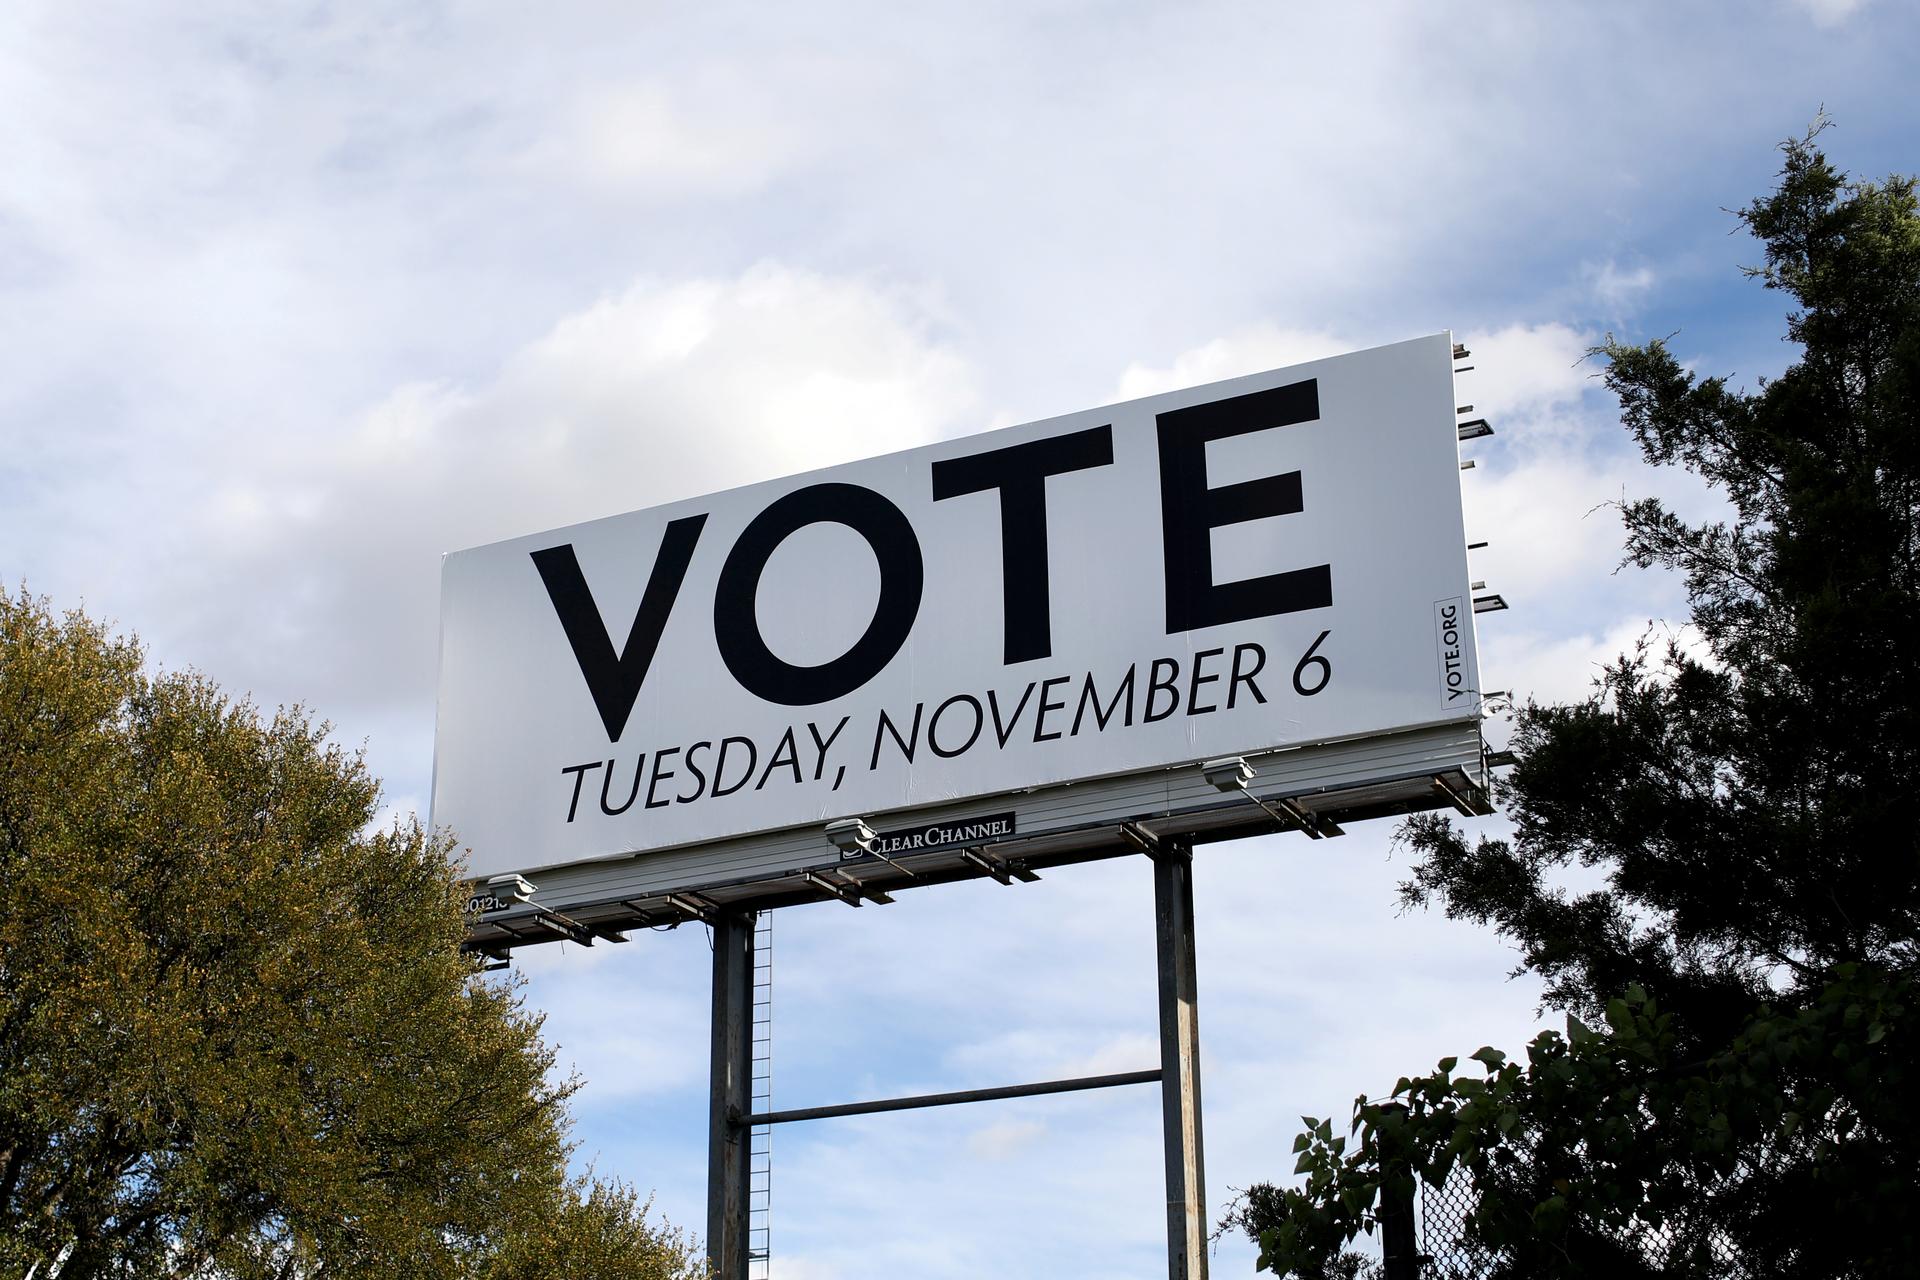 a white billboard with the words "VOTE" on it